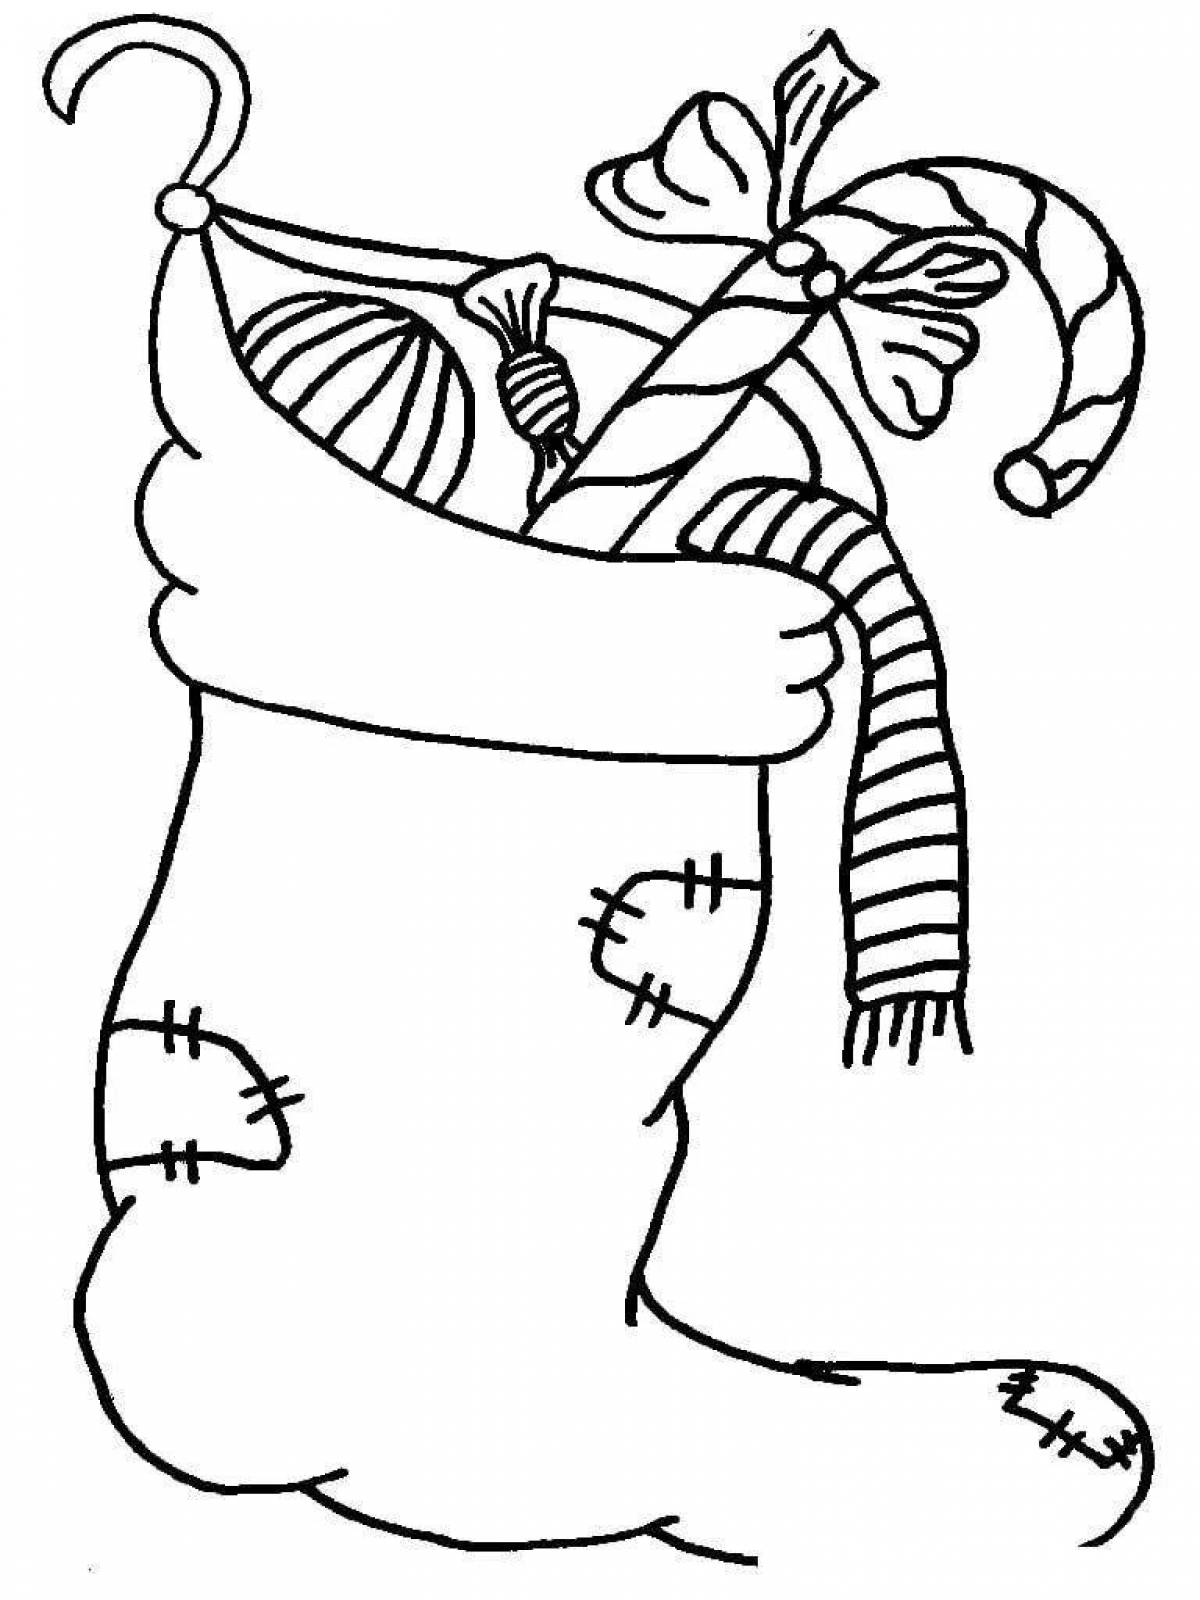 Glowing Christmas sock coloring page